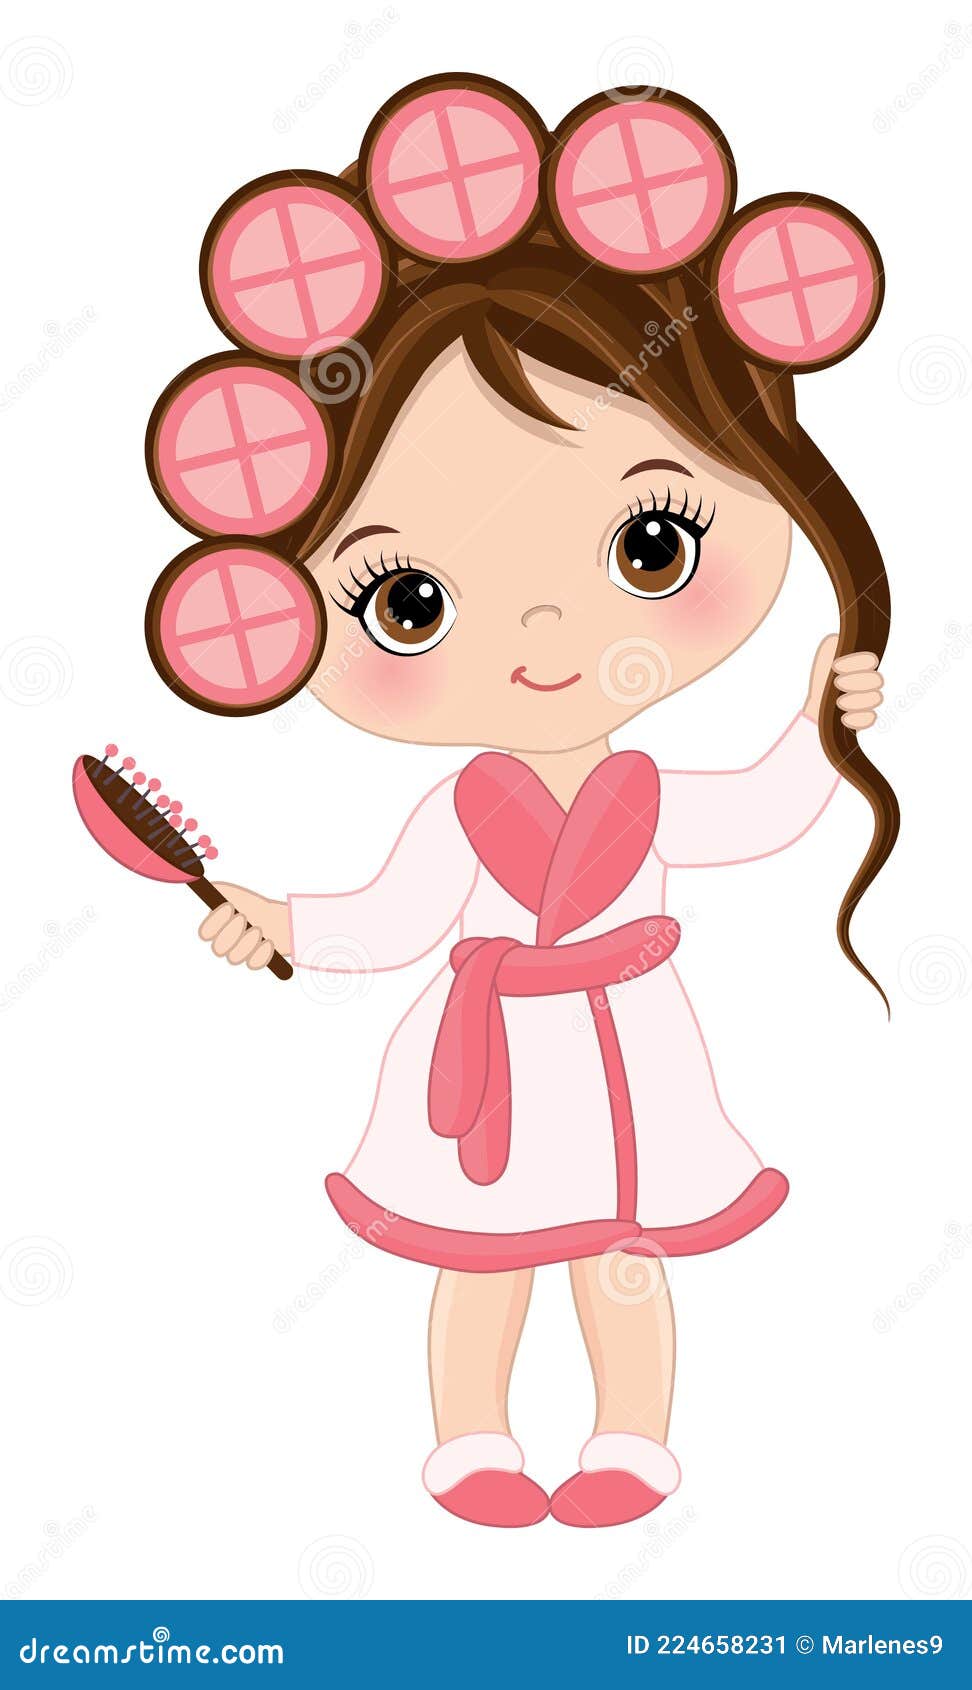  cute little spa girl with rollers and hair brush.  spa girl